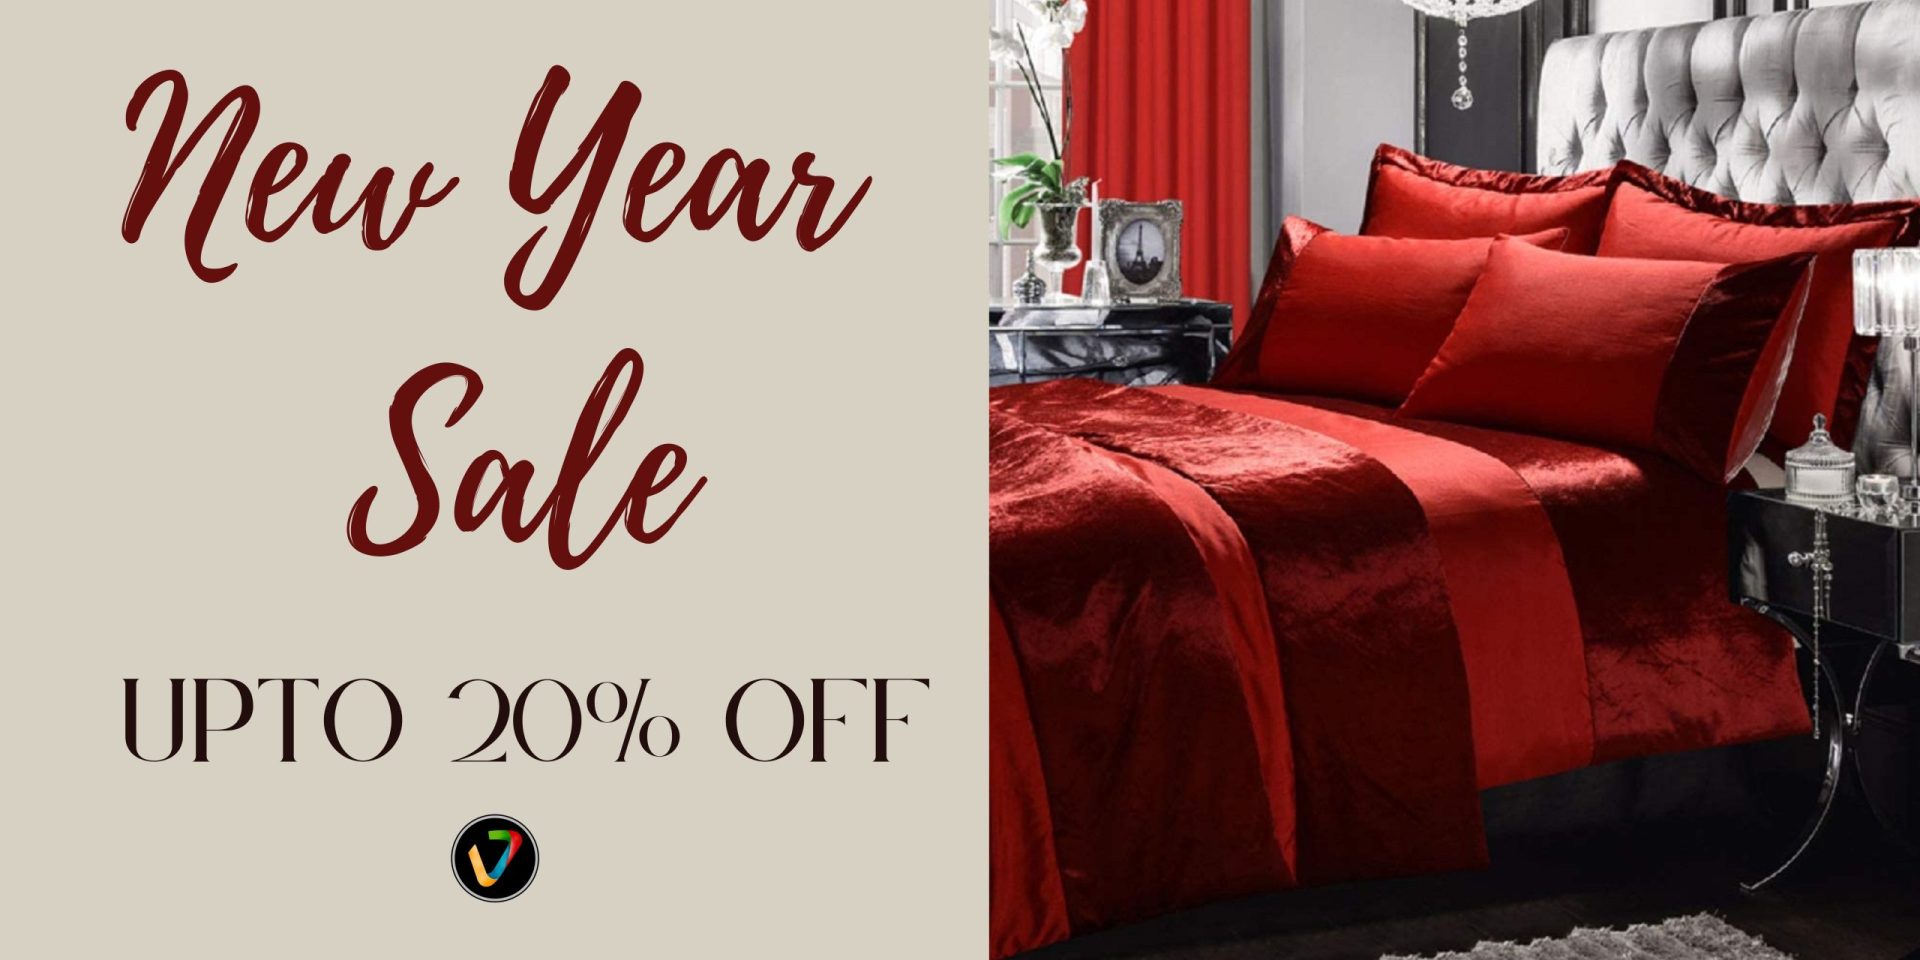 New year sale on bedding Voice 7 uk